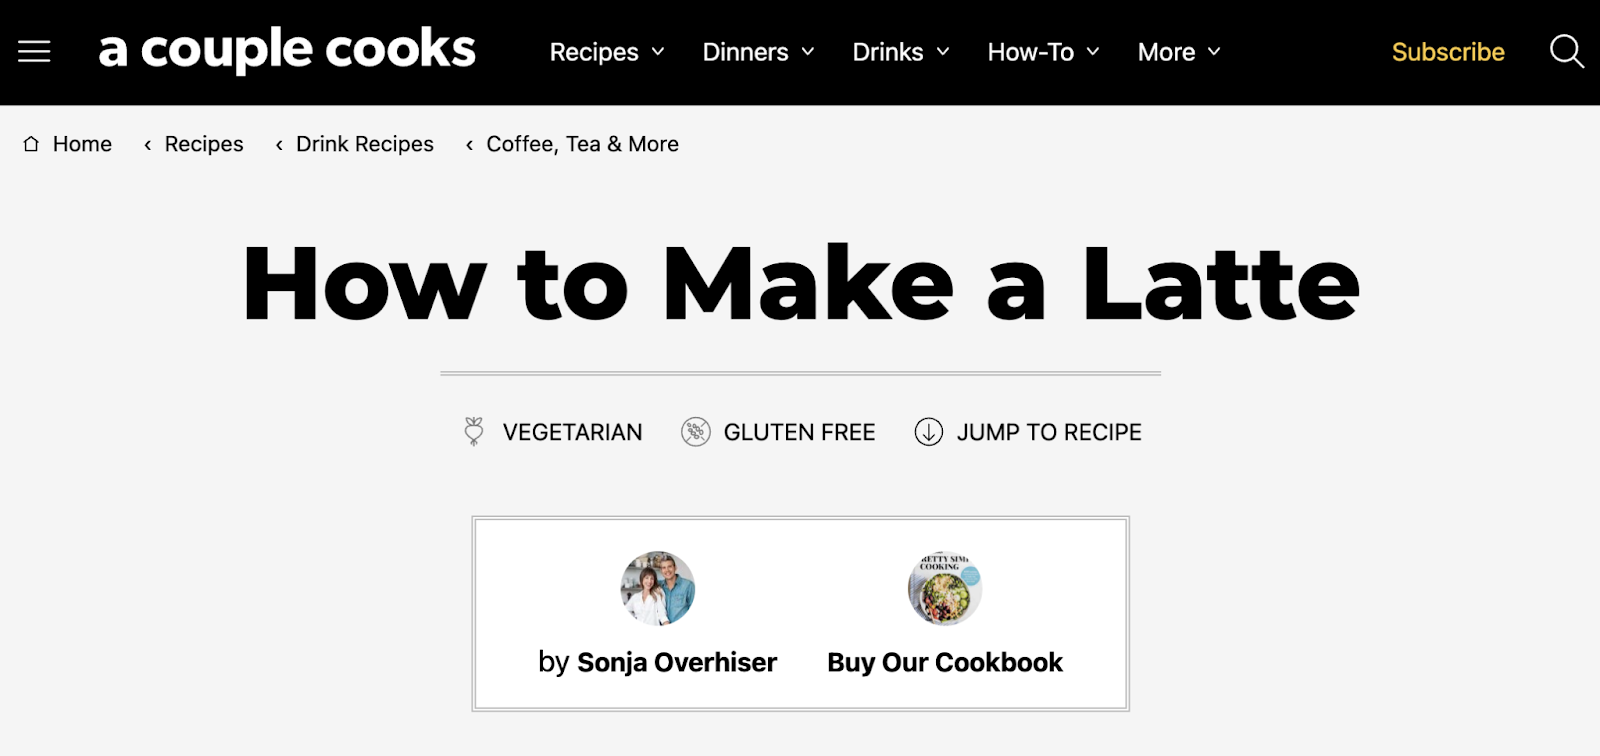 "How to Make a Latte" H1 from a couple cooks's article